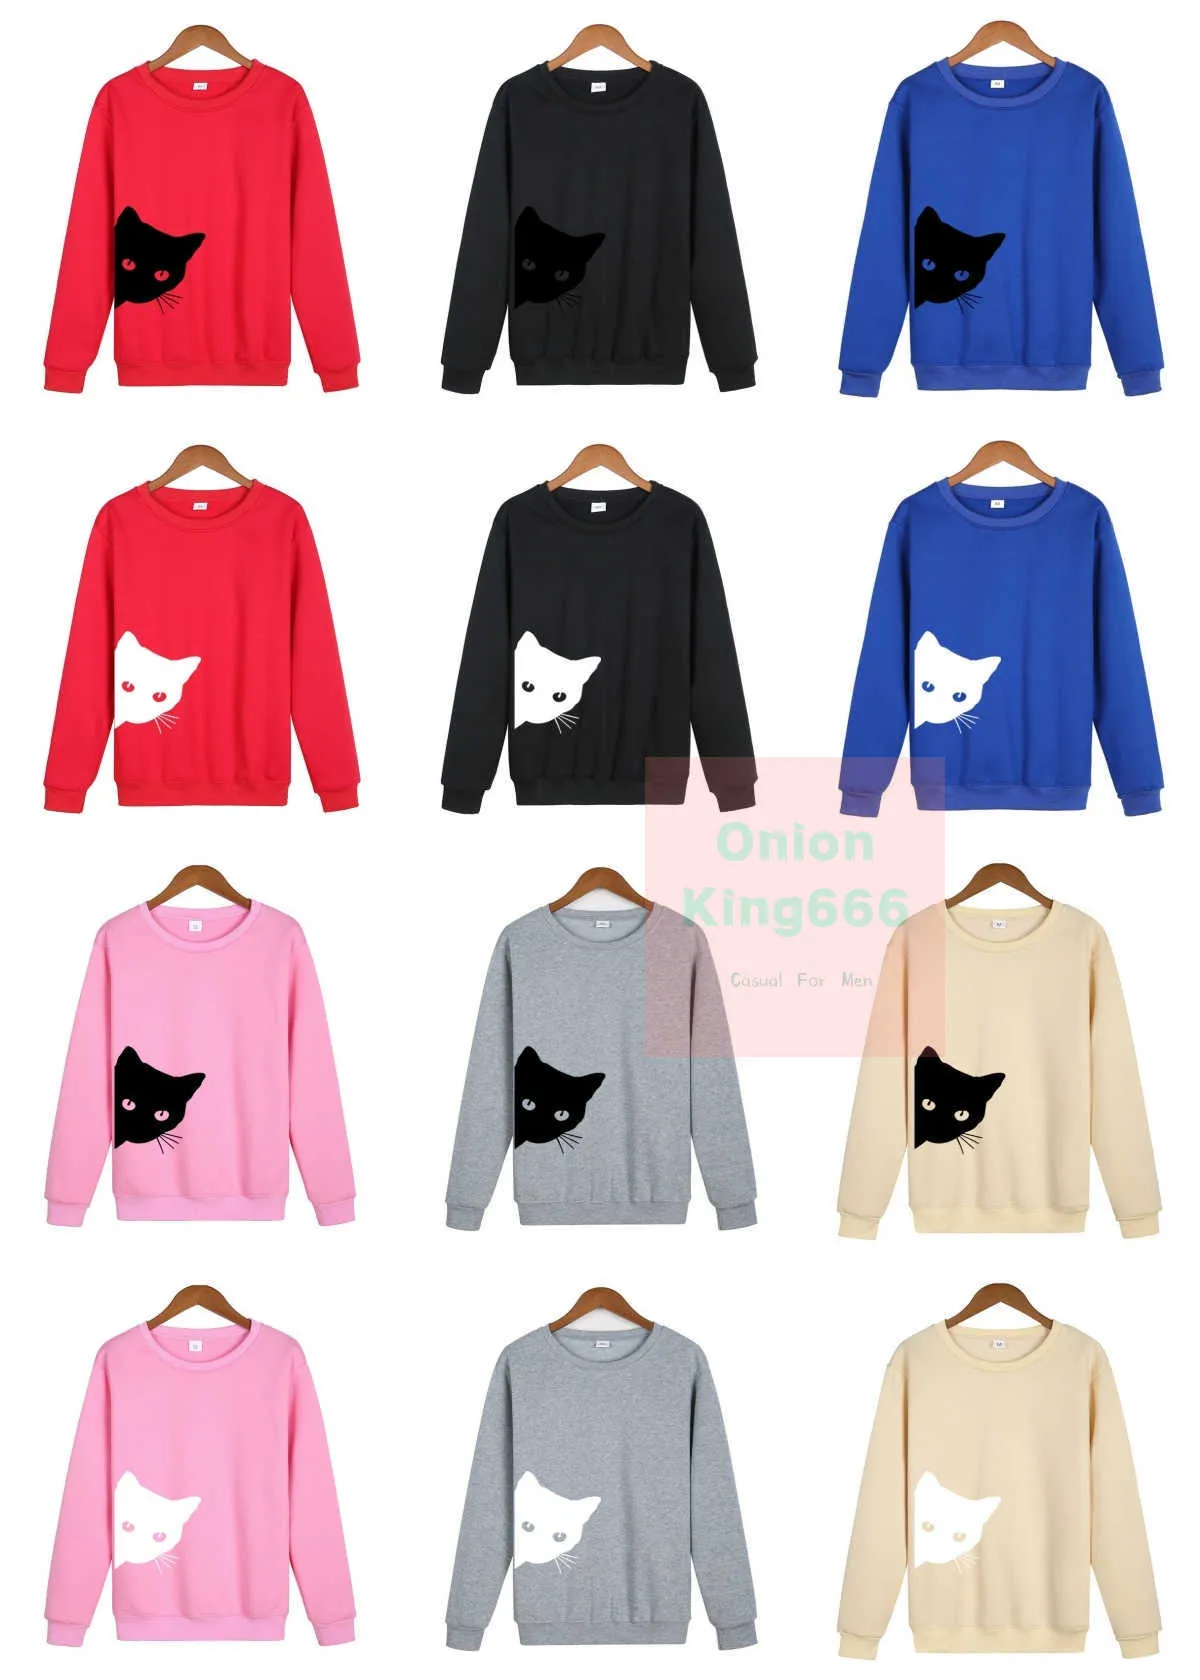 Designer Fashion Hoodie Couple's Street Wear Printed The Cat Head New Plush Sweater For Men Women In Spring And Autumn